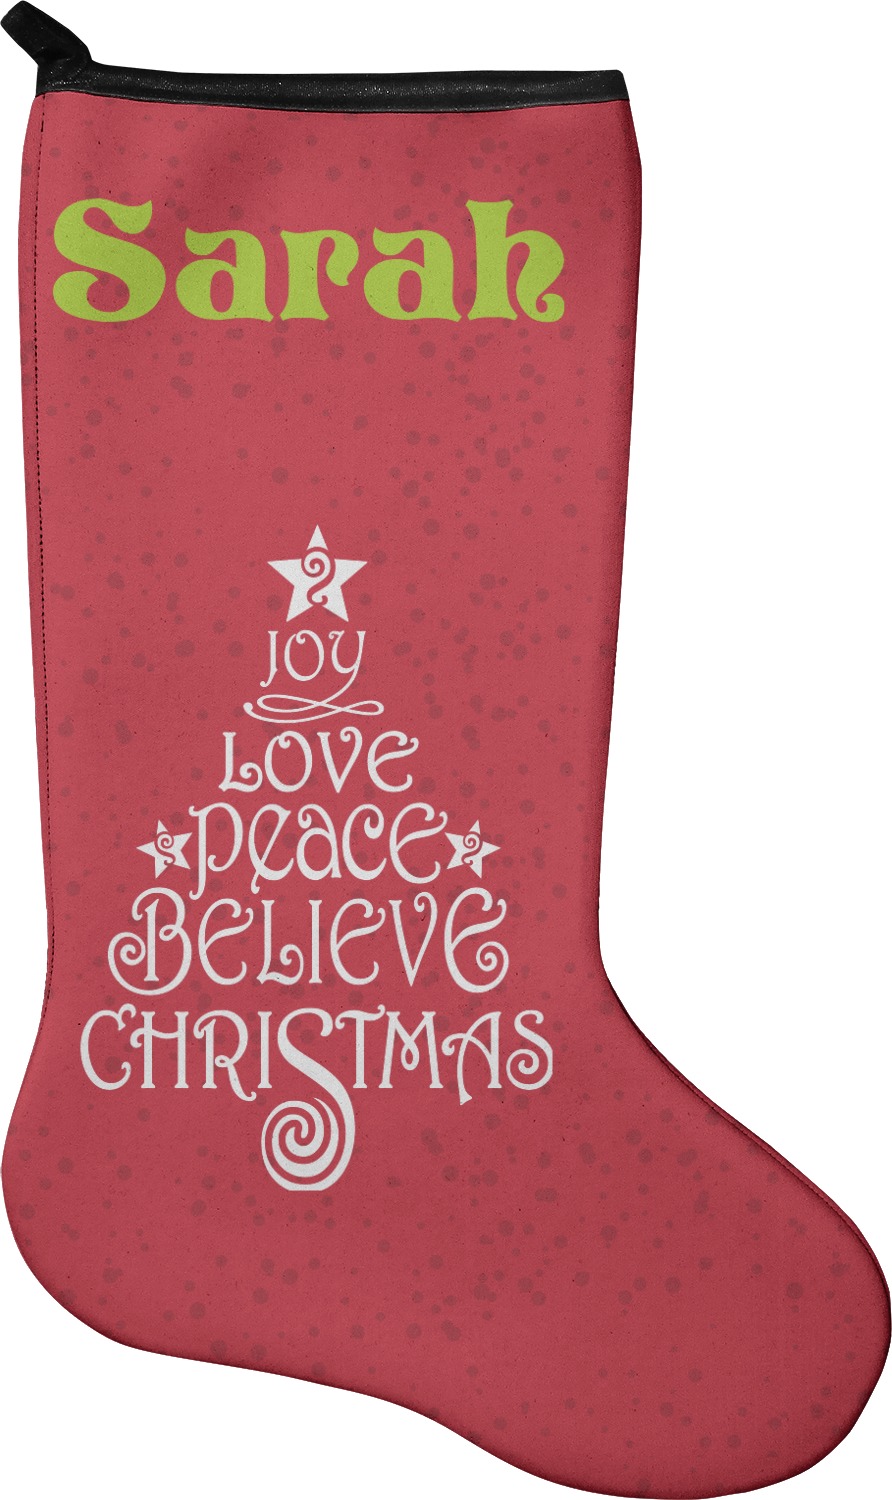 https://www.youcustomizeit.com/common/MAKE/1038049/Christmas-Quotes-and-Sayings-Stocking-Single-Sided.jpg?lm=1555062034